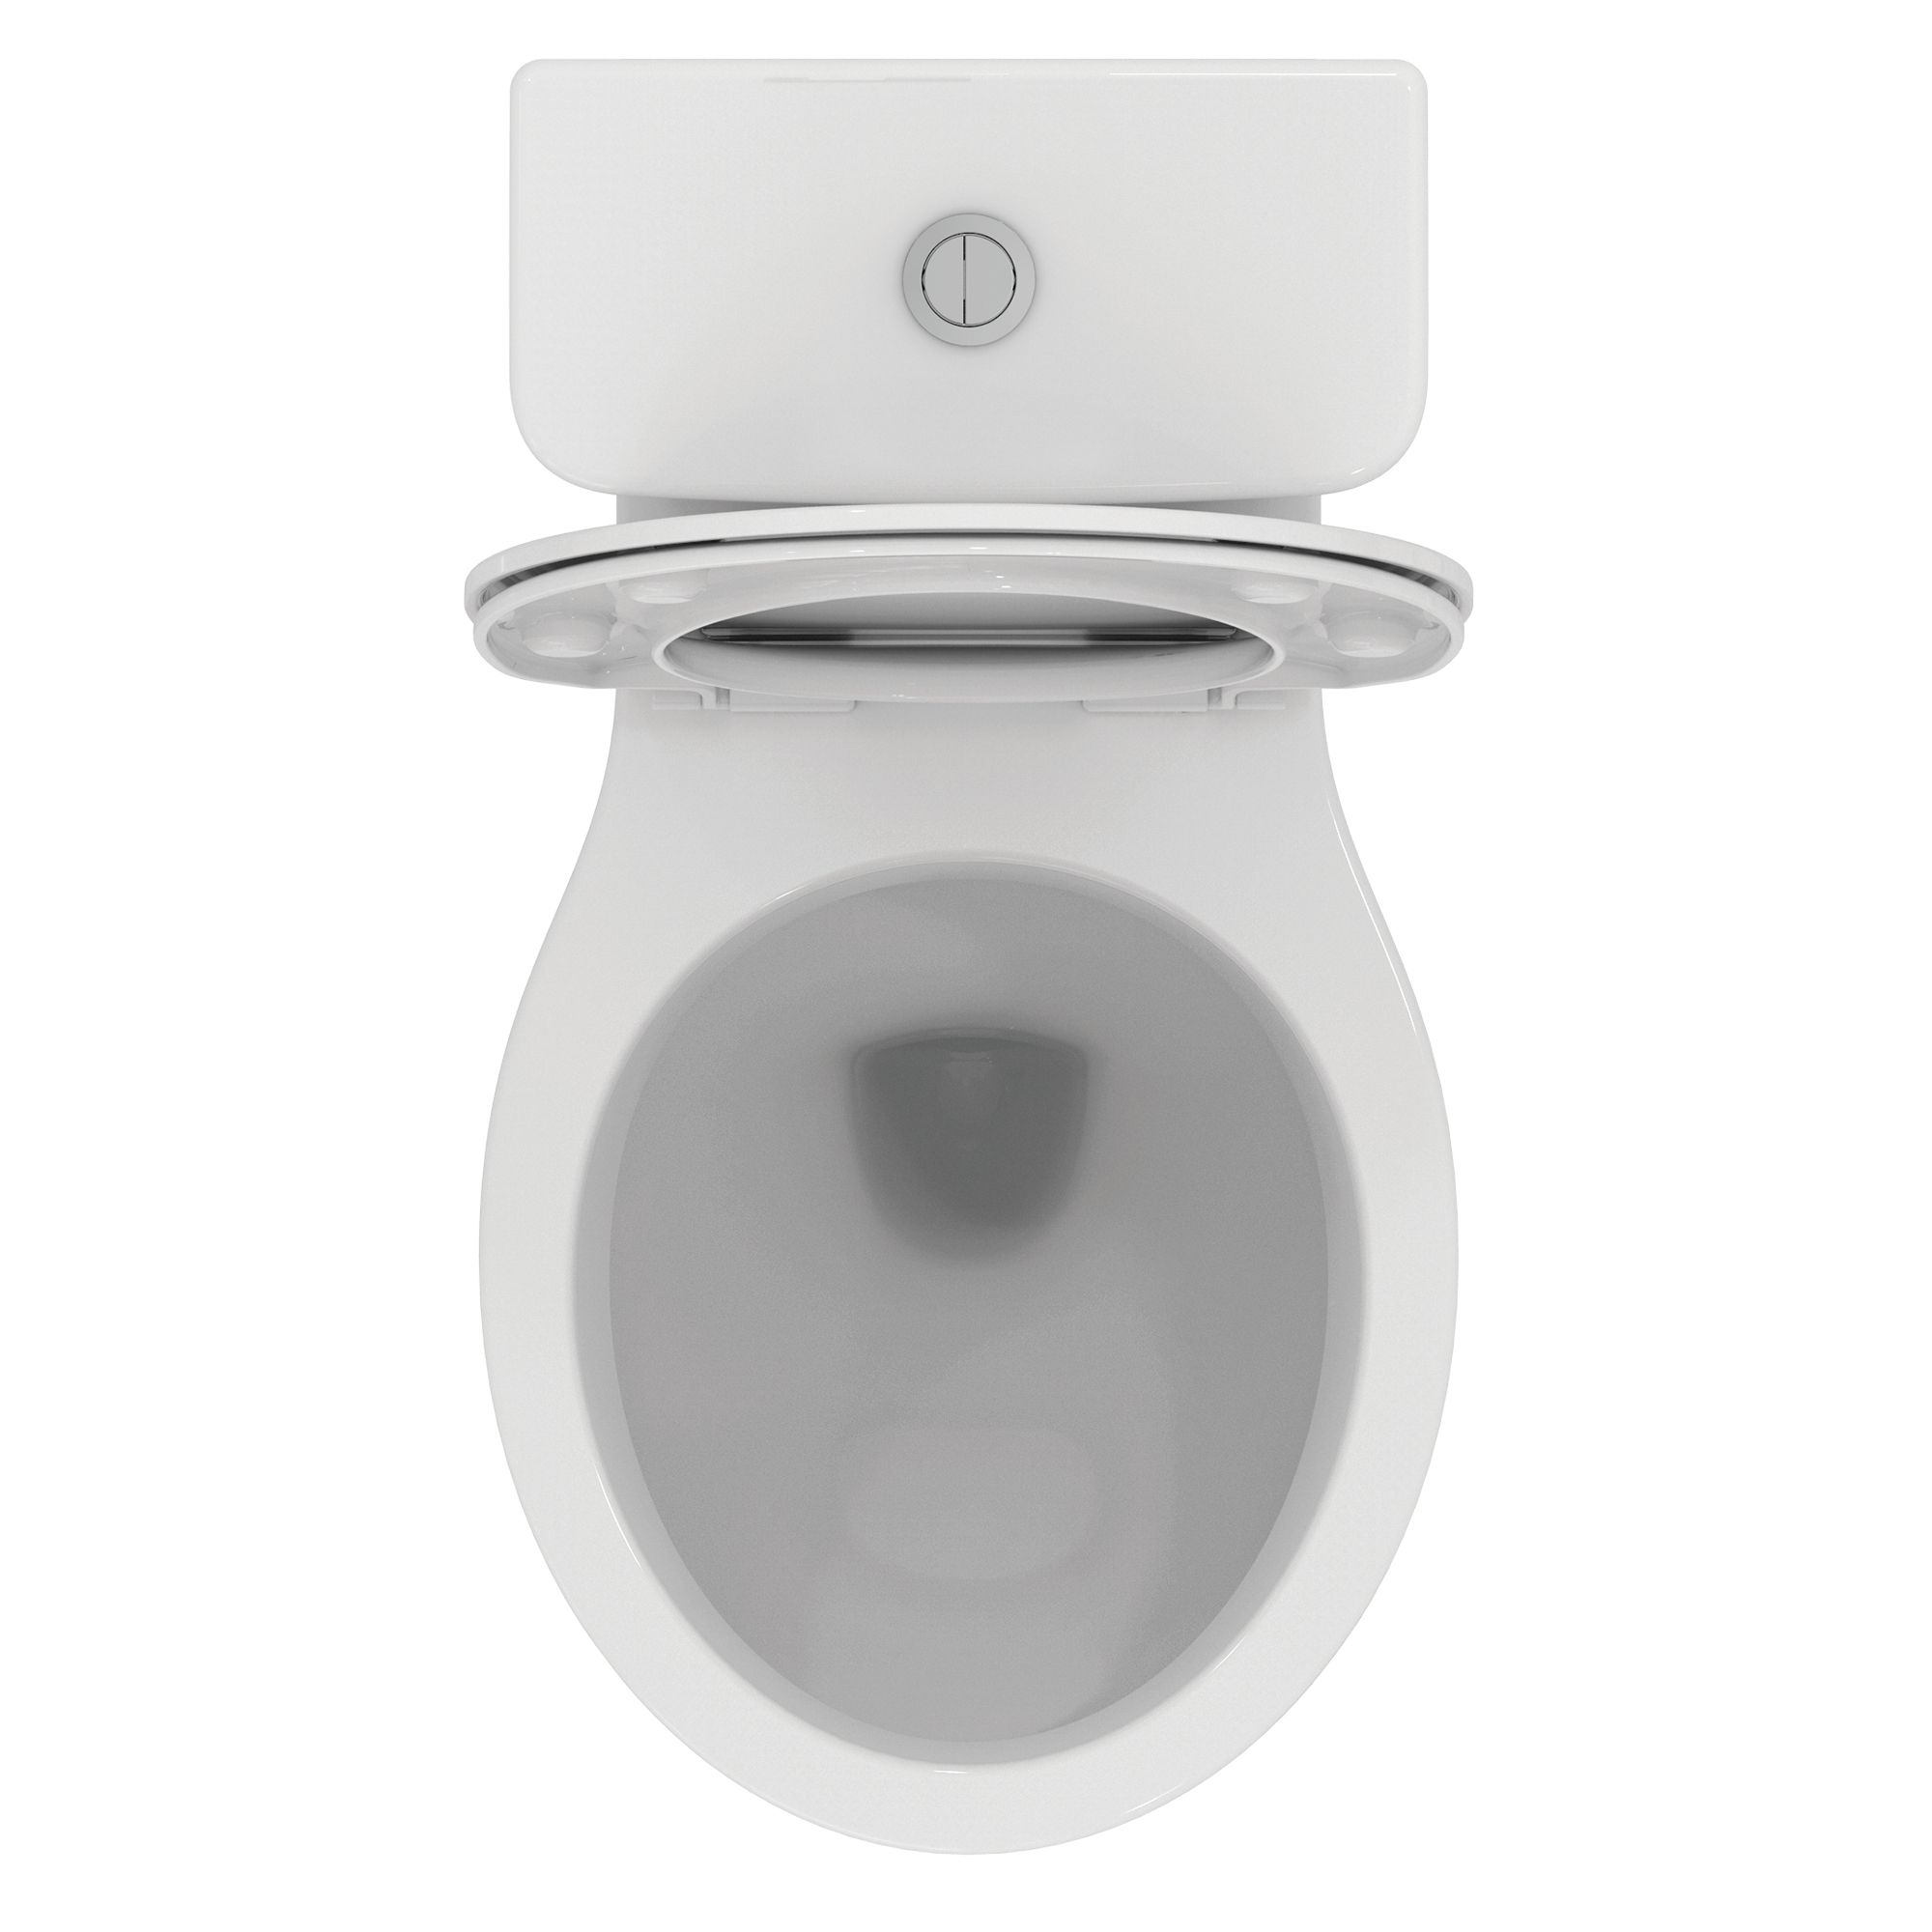 Ideal Standard Tirso White Standard Close-coupled Round Toilet set with Soft close seat